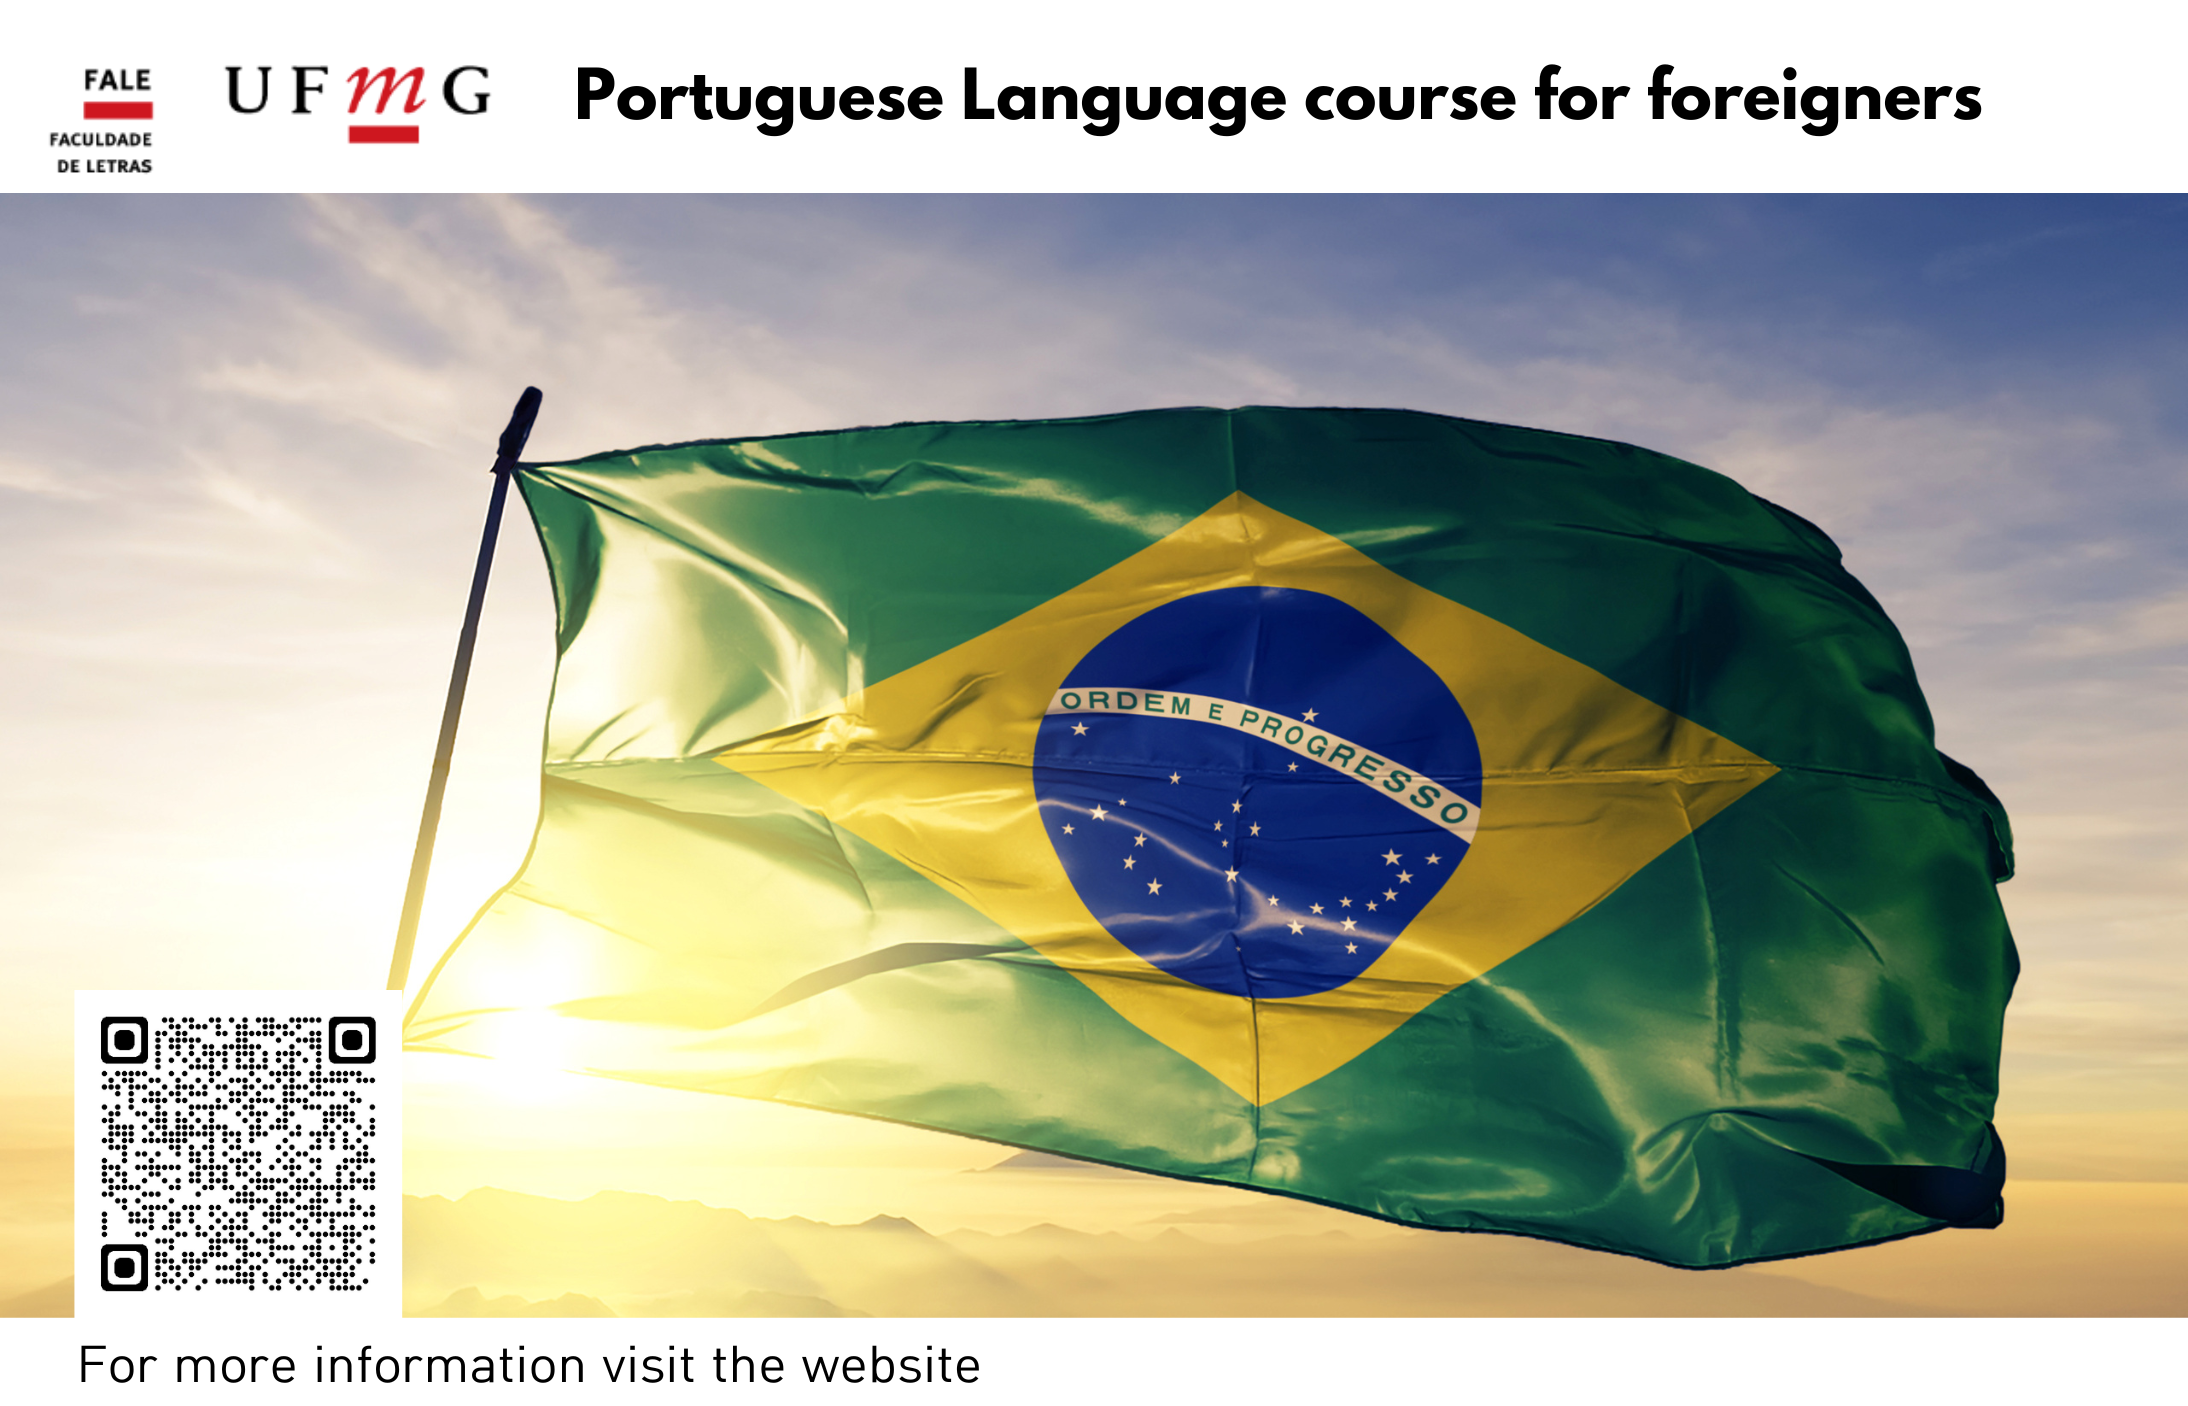 Portuguese Language course for foreigners - UFMG